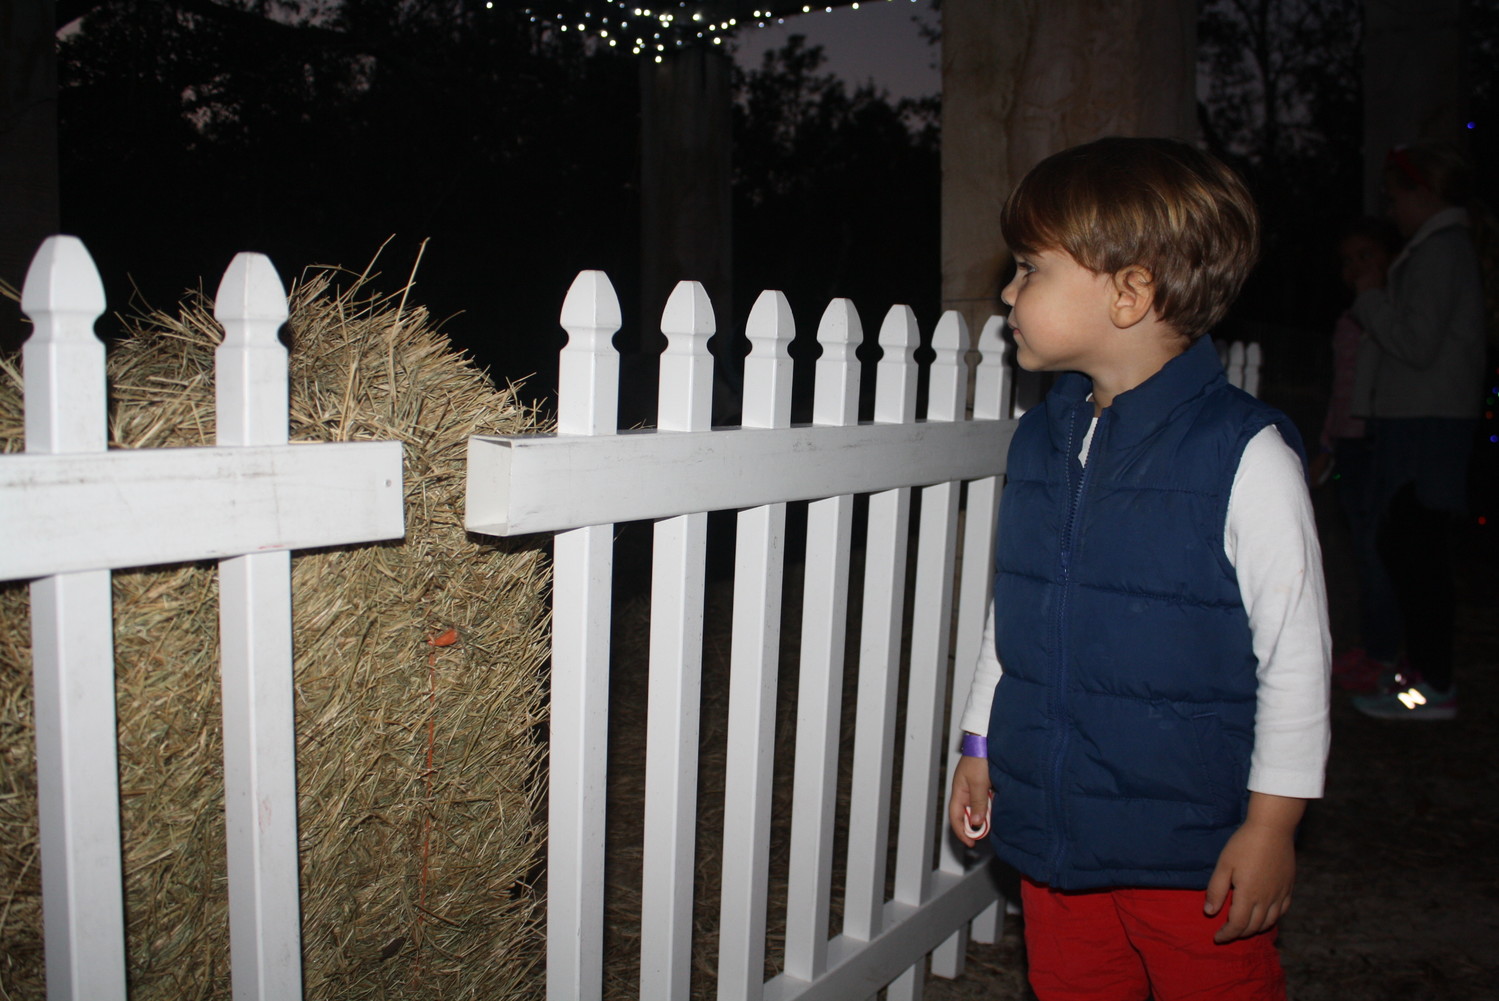 A child takes in the Village’s live manger scene.